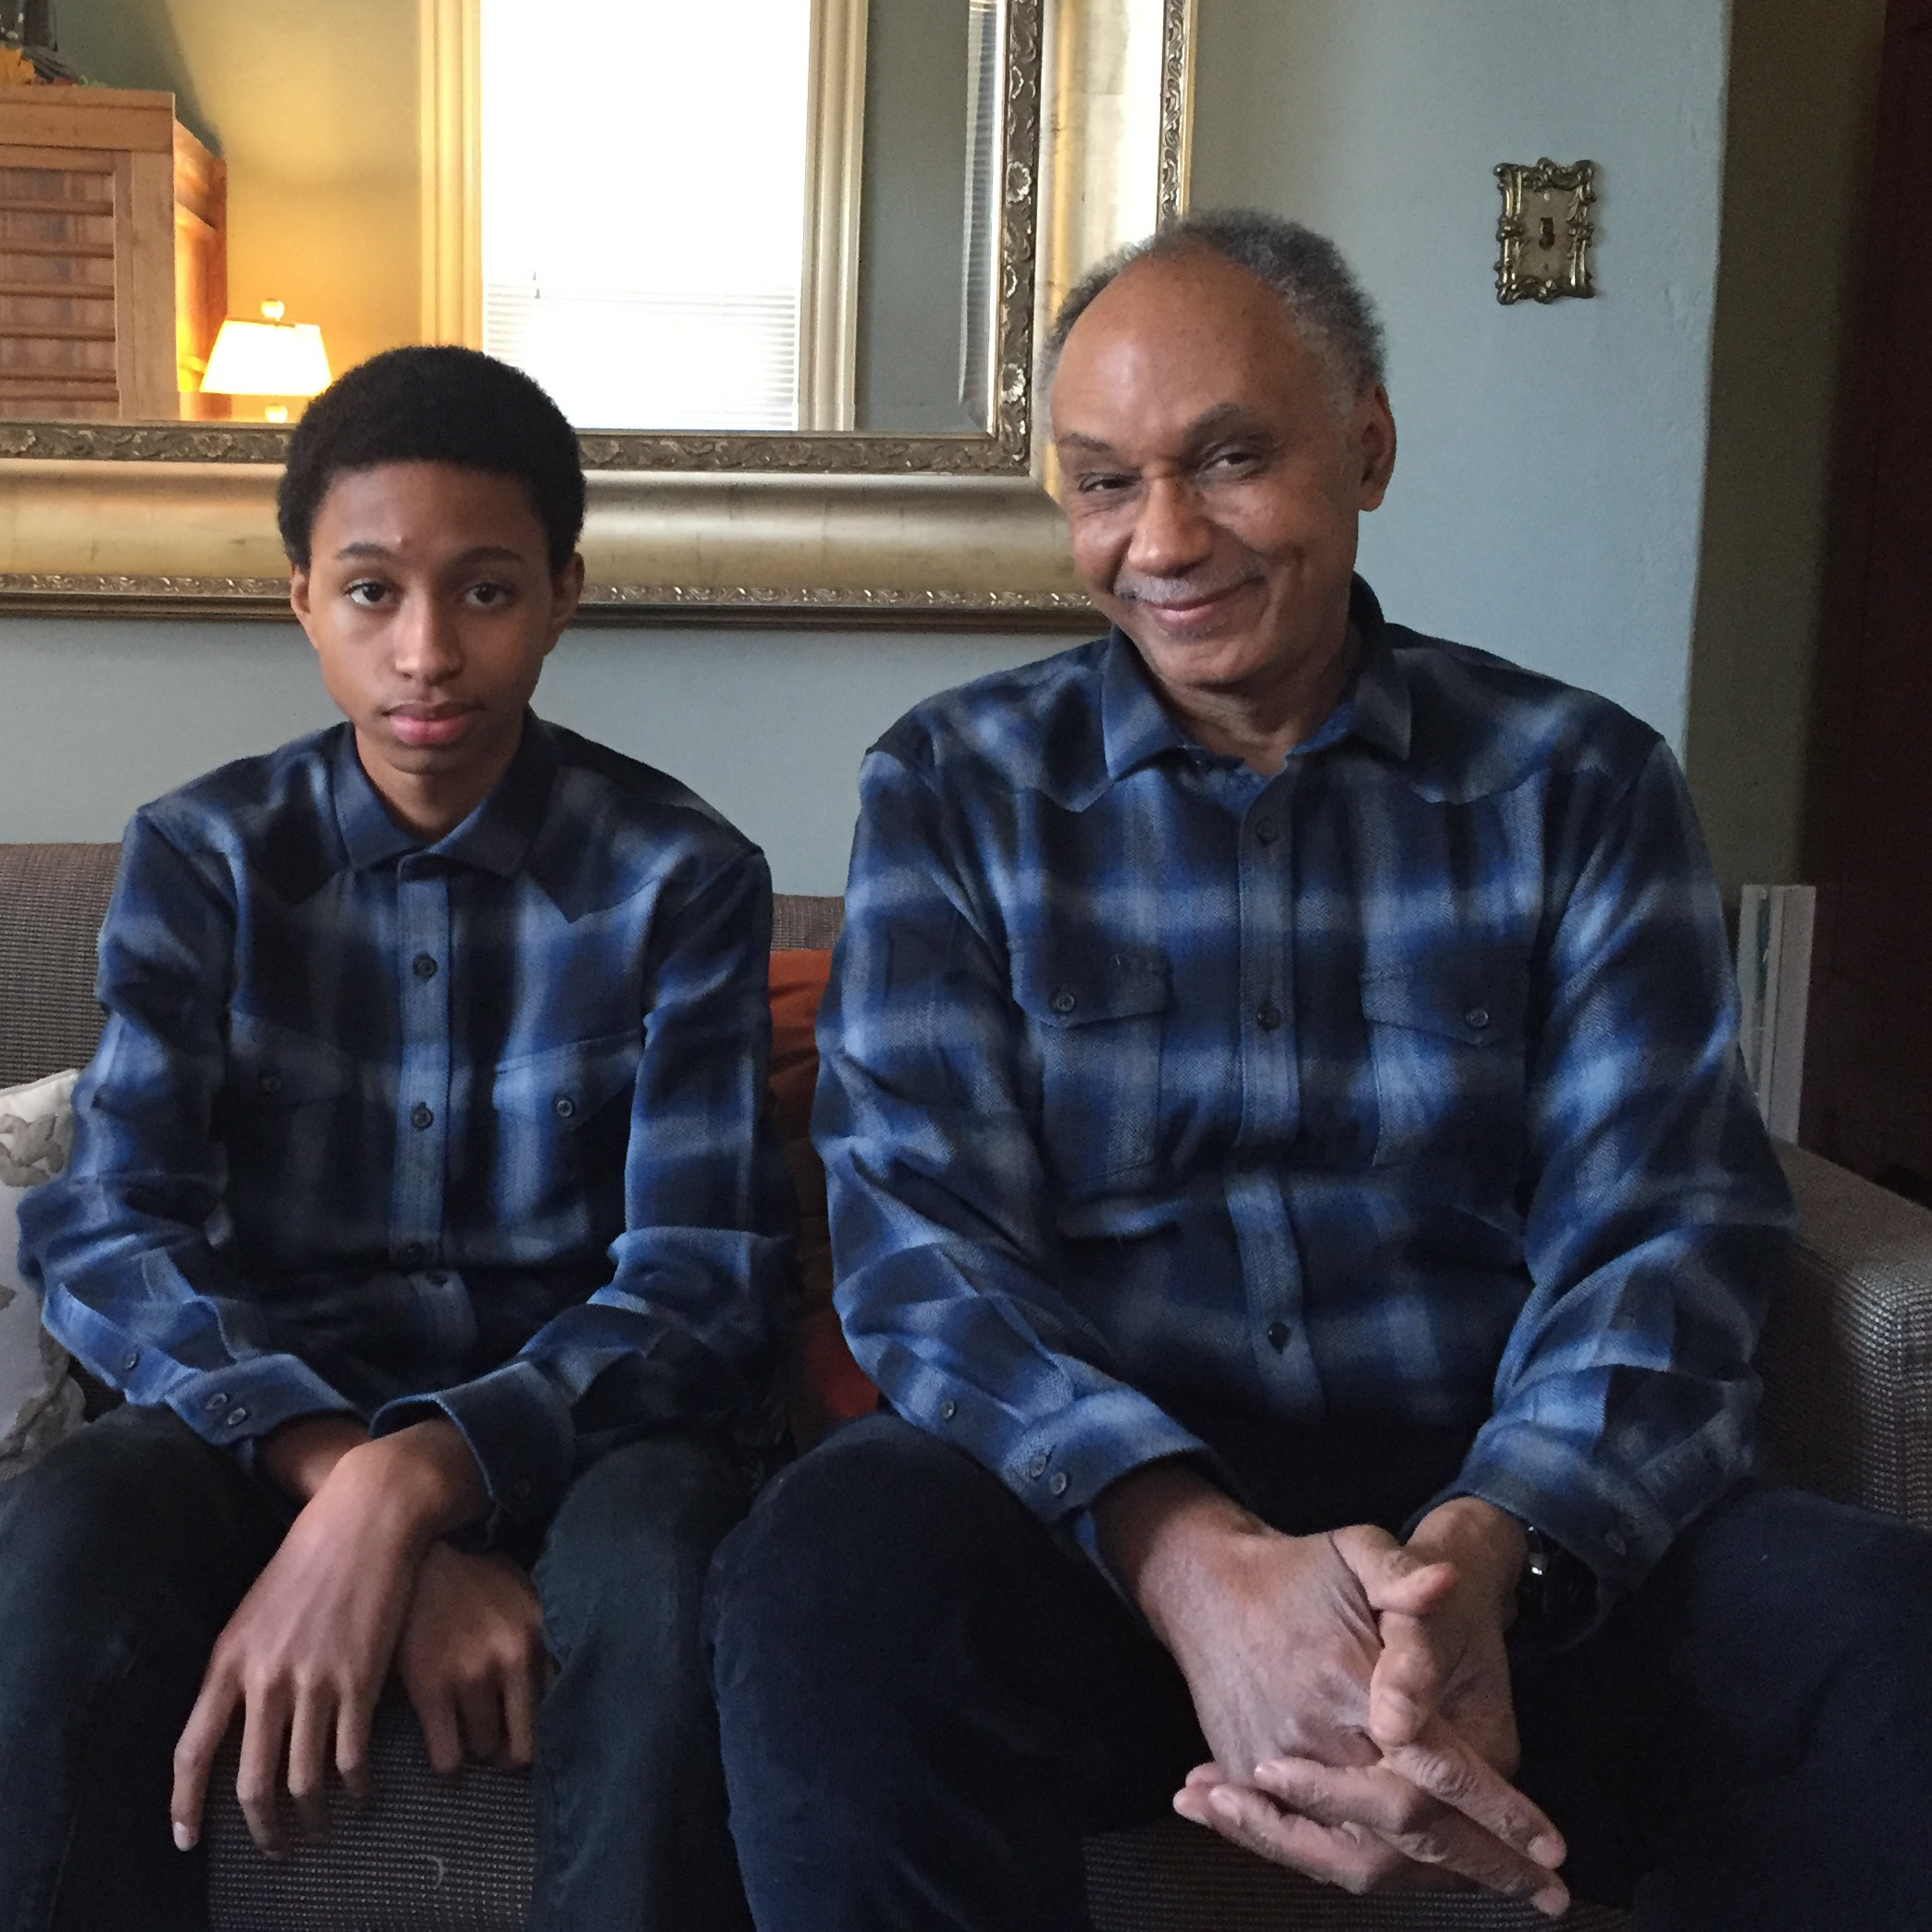 Tyler Stovall seated with his son, Justin, wearing the same outfit